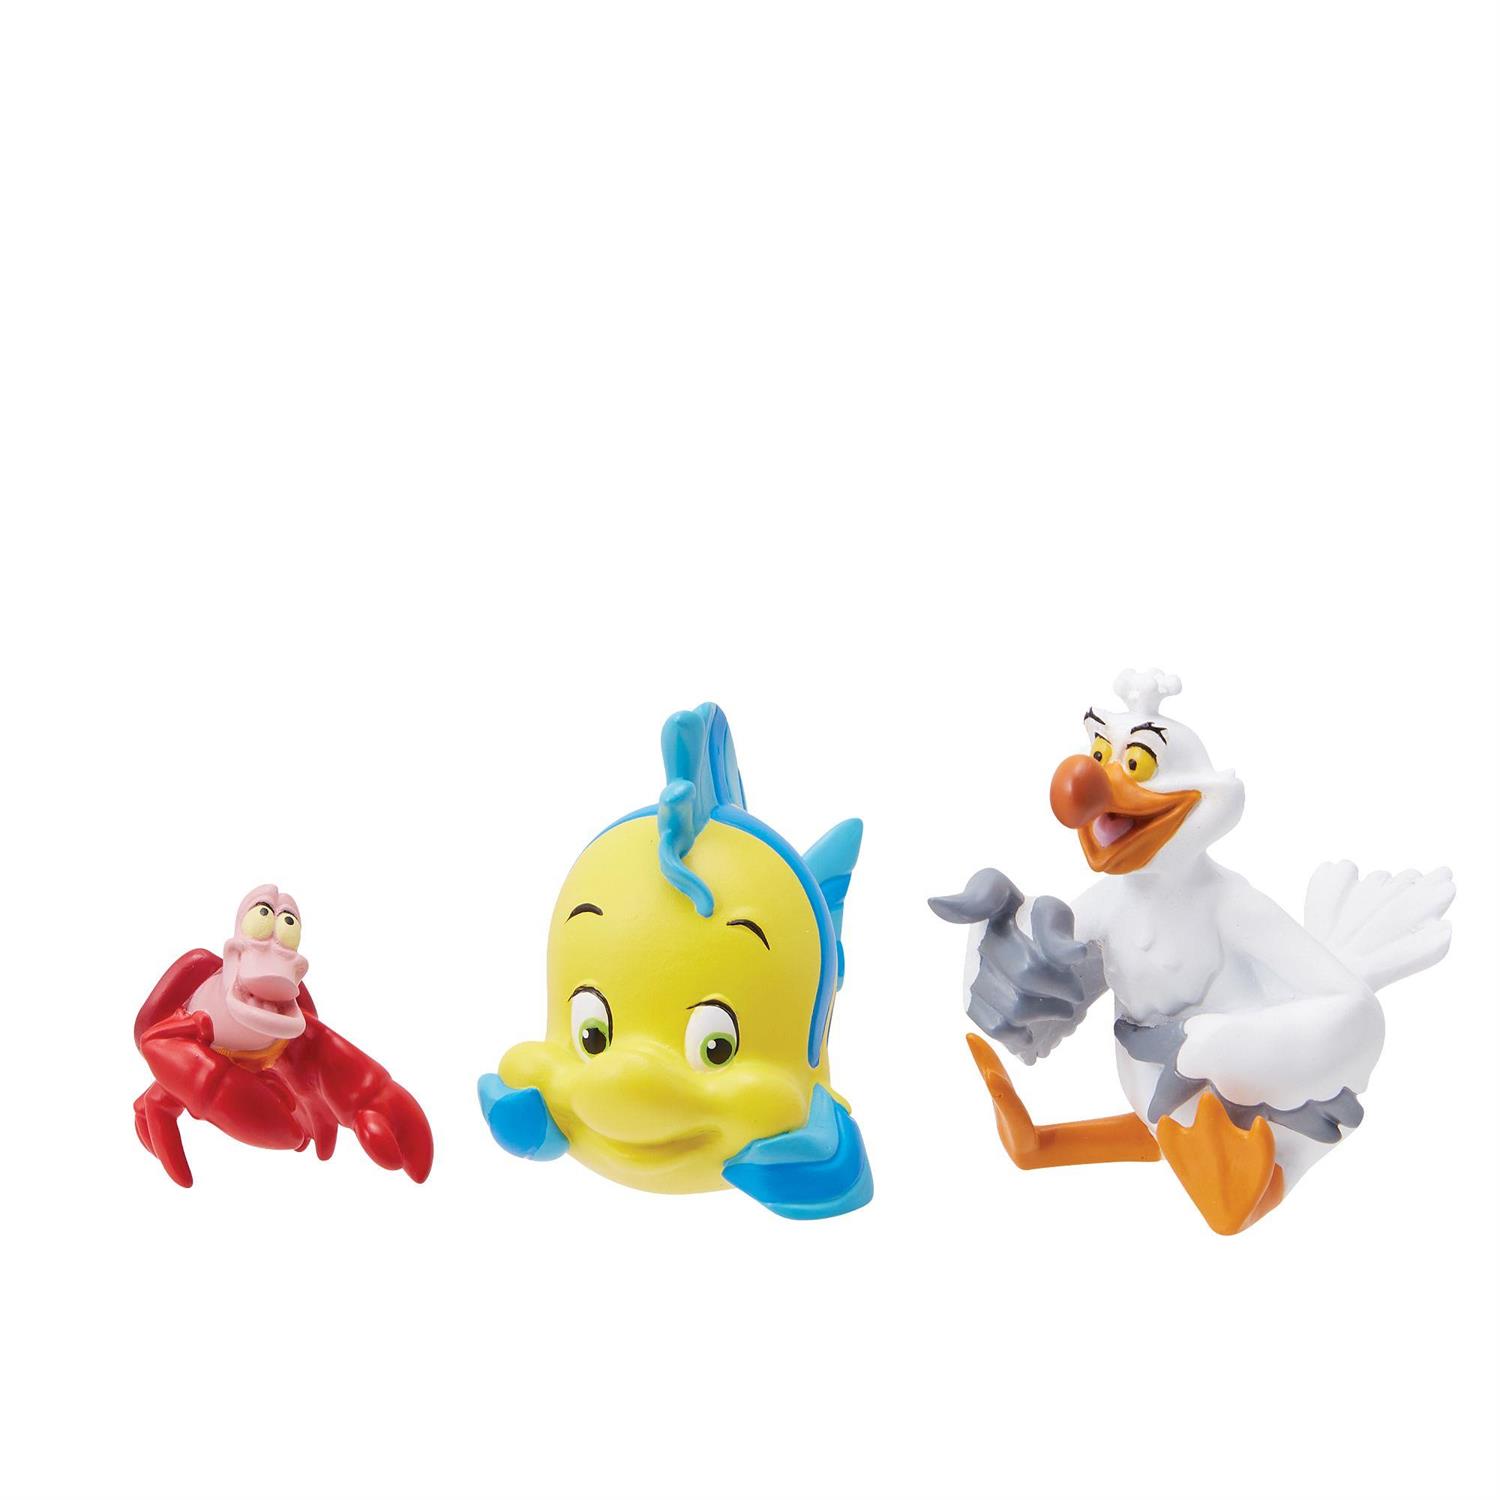 Disney Traditions Collection by Jim Shore Ariel with Flounder The Little  Mermaid Figurine